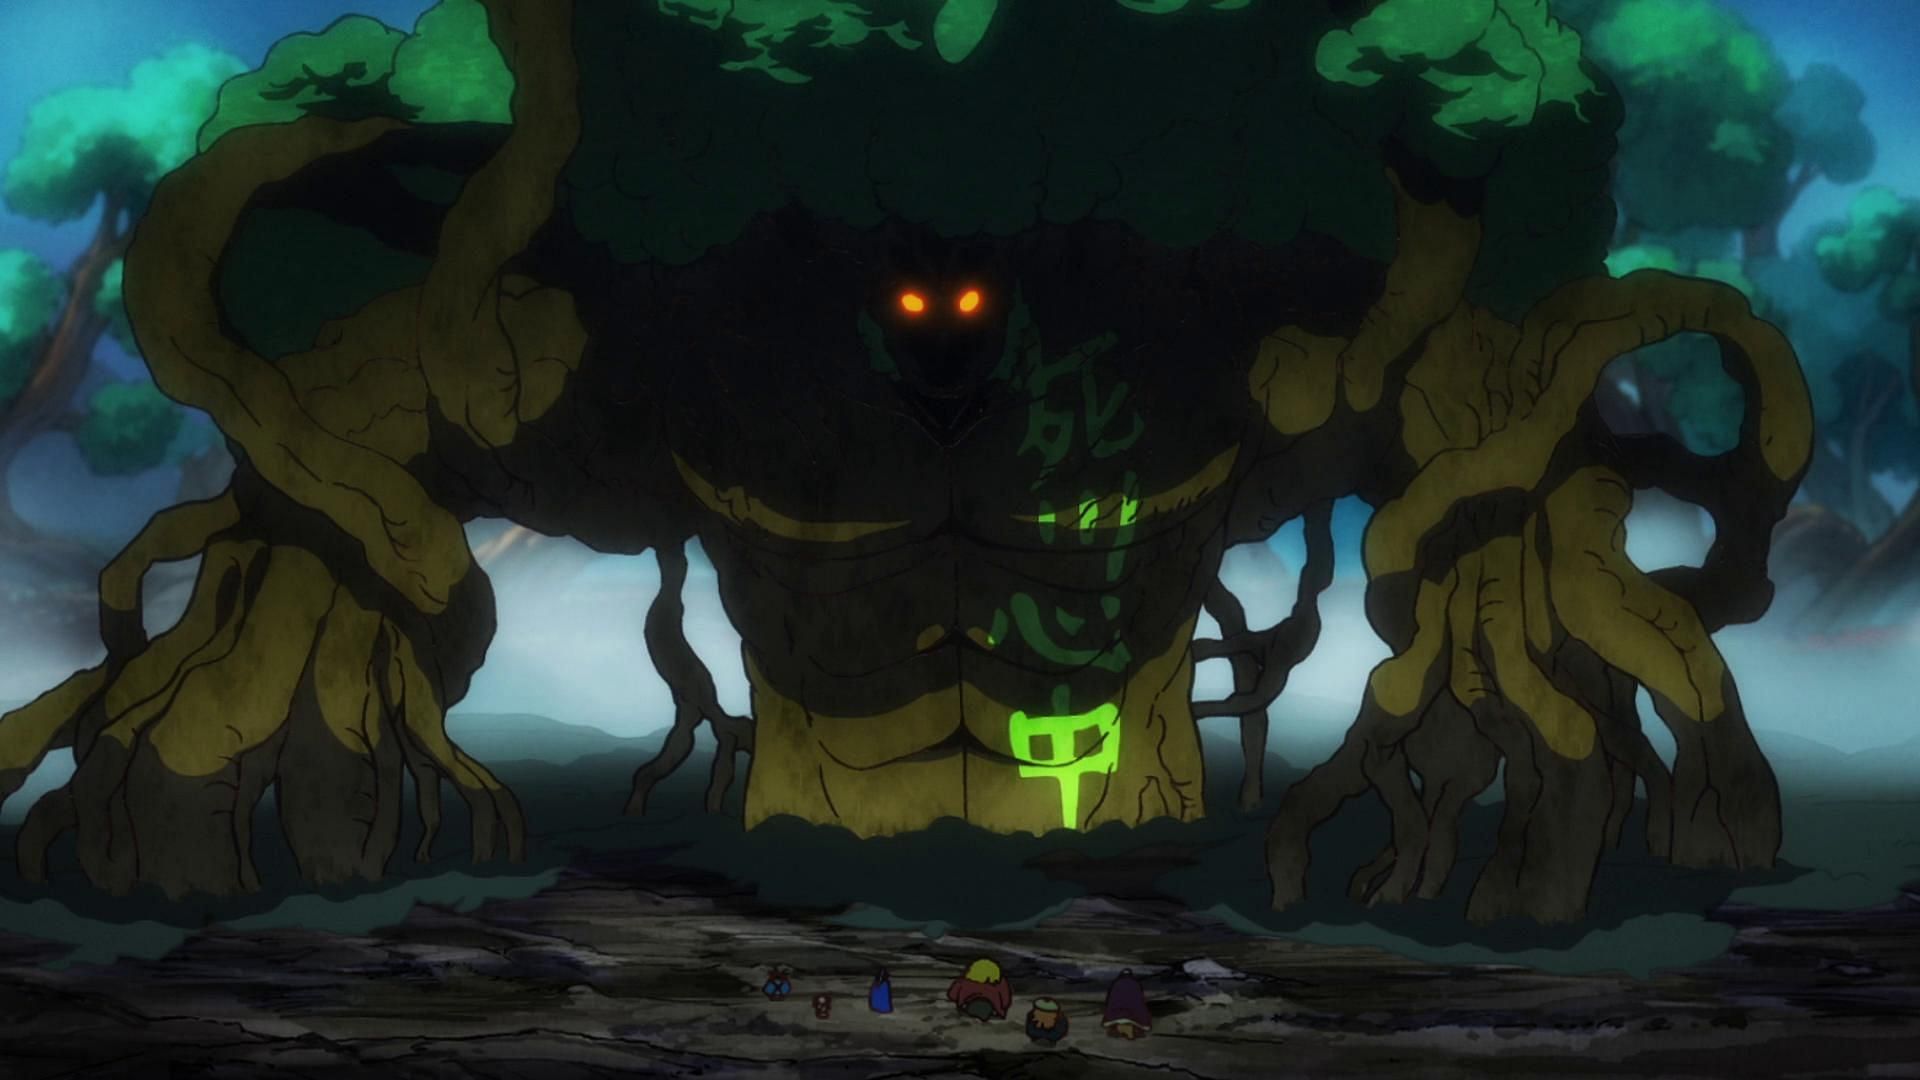 The Wood-Wood Fruit as seen in One Piece (Image via Toei Animation)